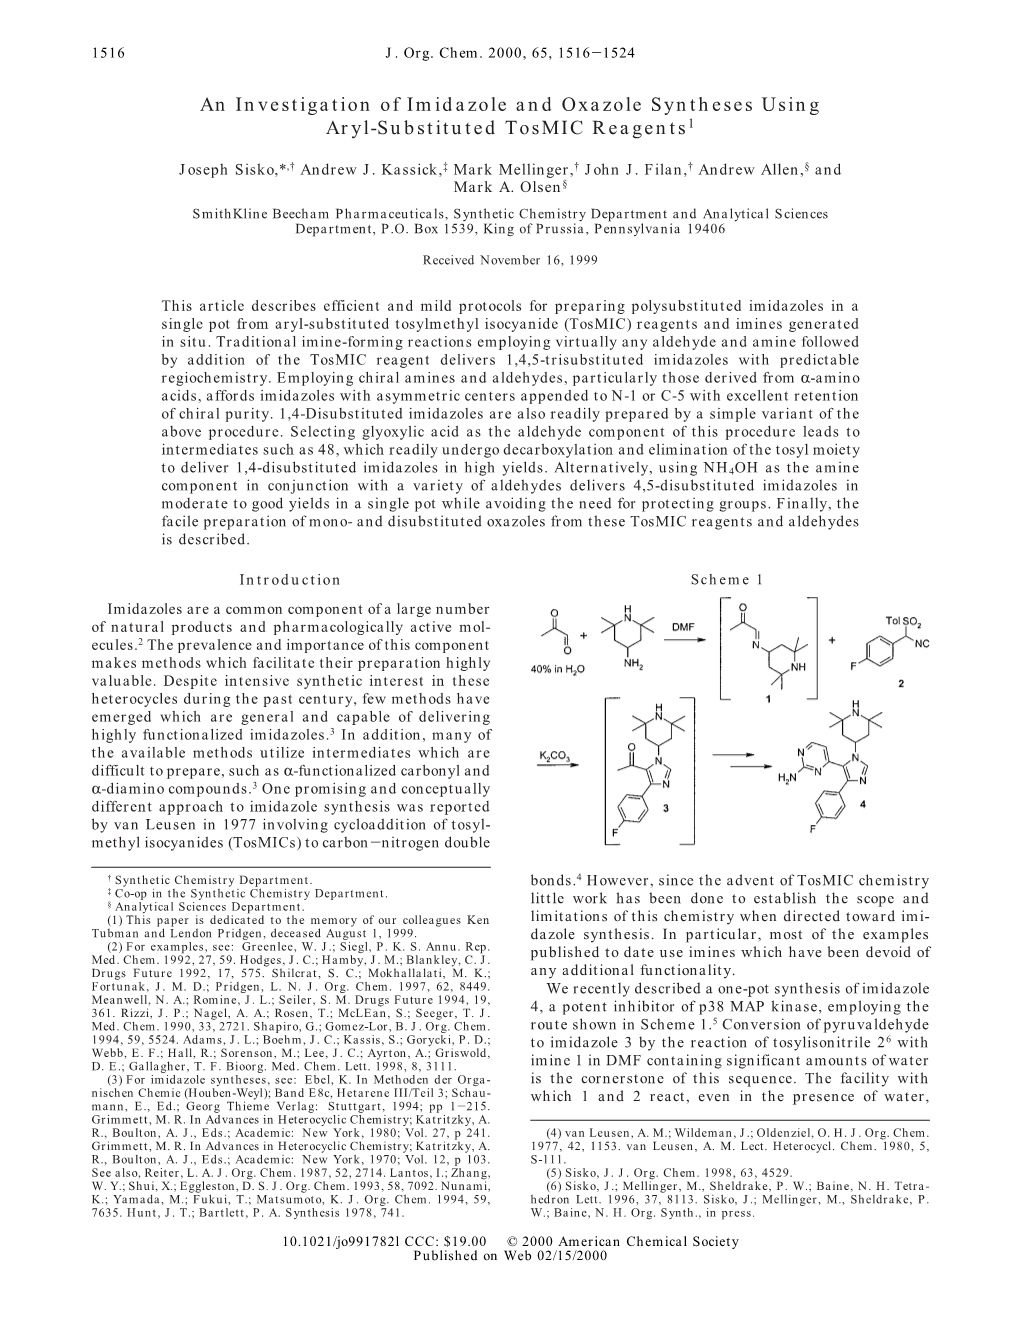 An Investigation of Imidazole and Oxazole Syntheses Using Aryl-Substituted Tosmic Reagents1